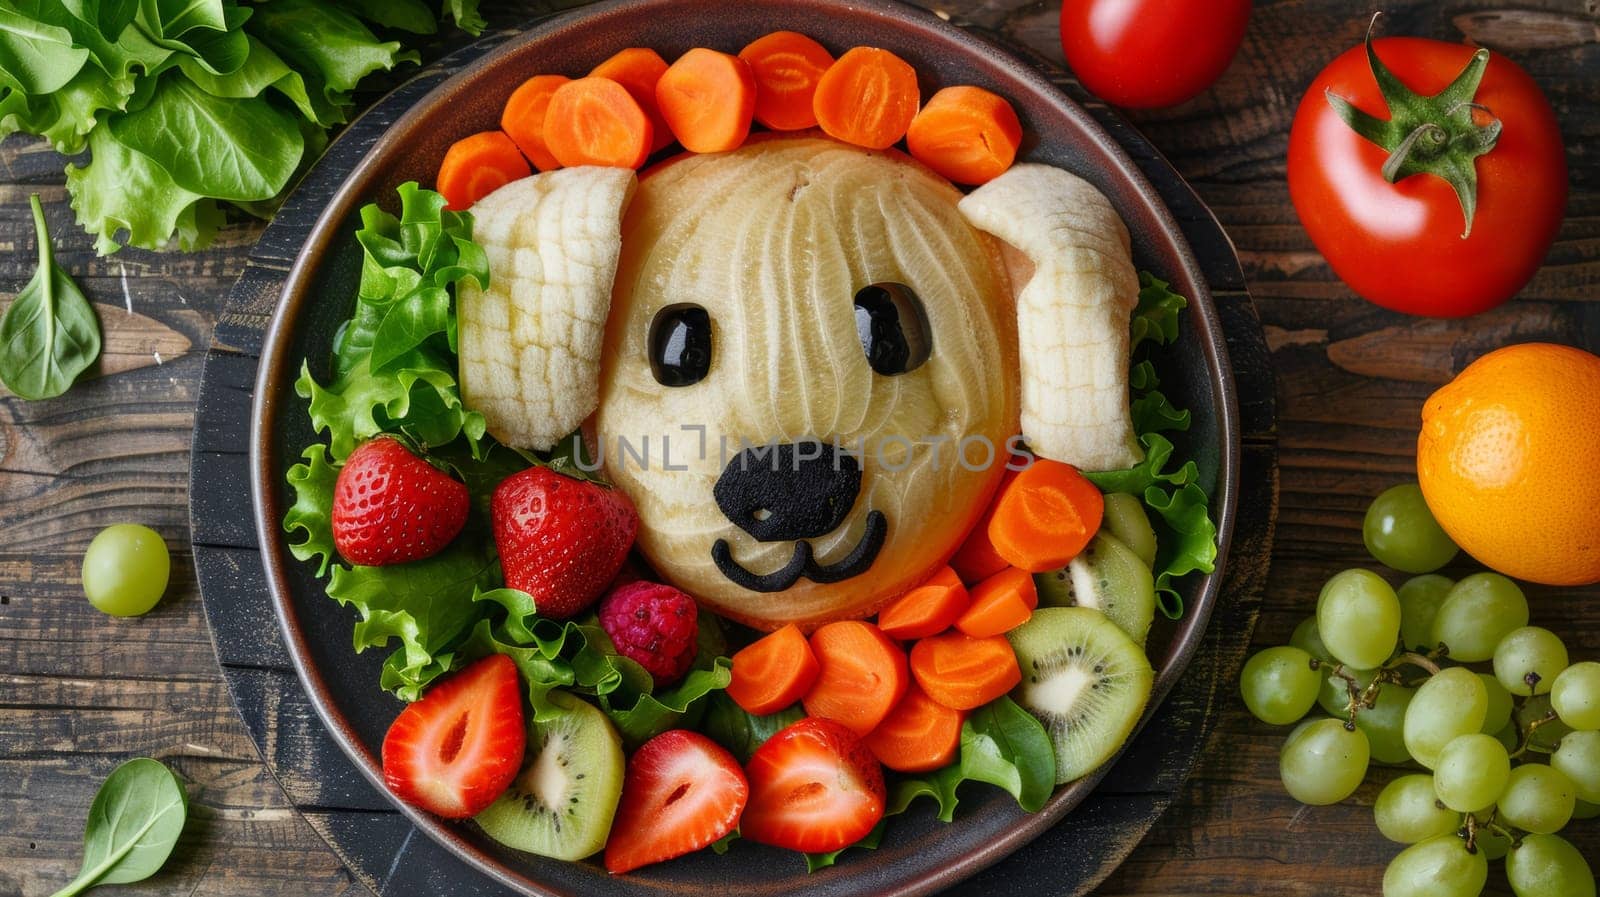 A plate of a dog made out of fruit and vegetables